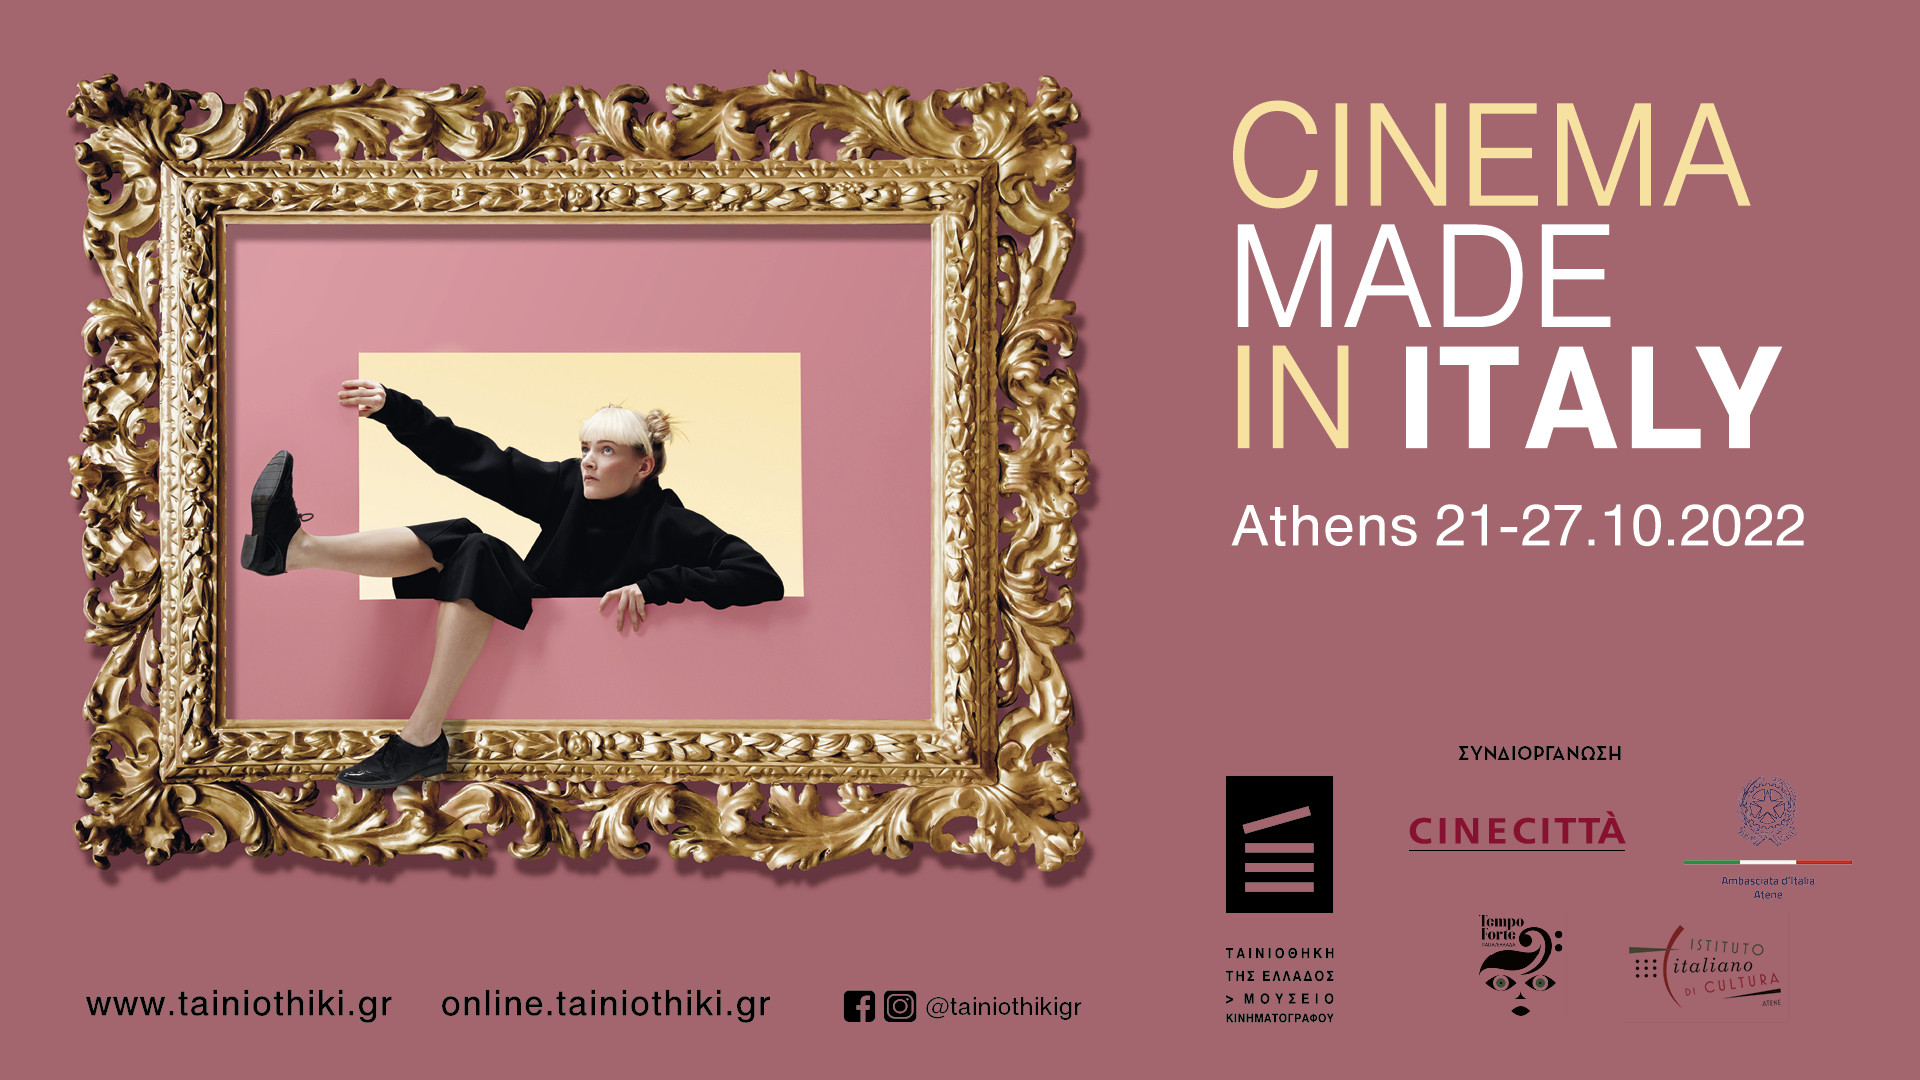 CINEMA MADE IN ITALY / ATHENS 2022